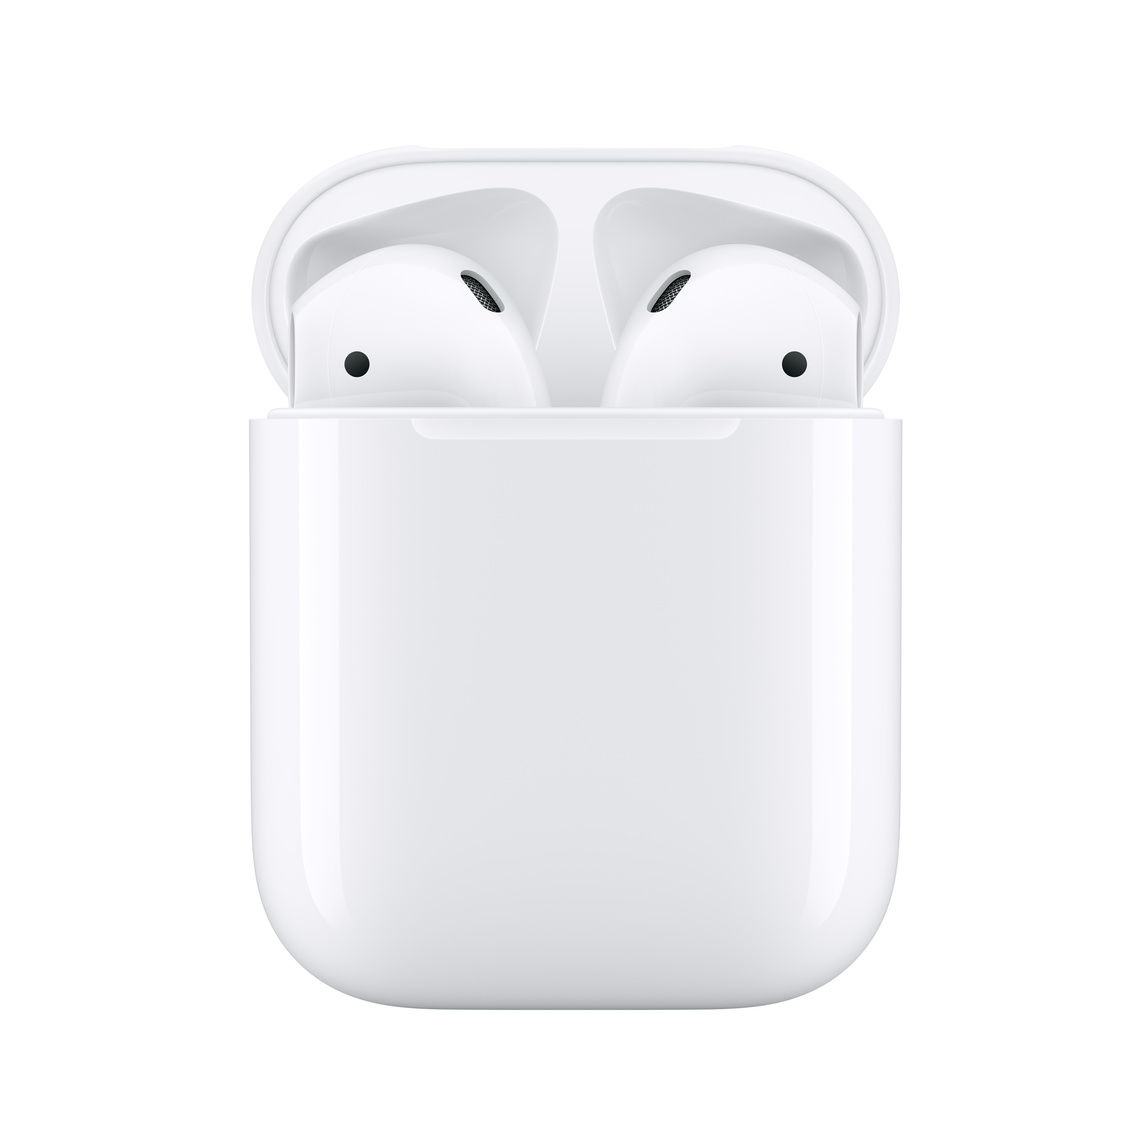 Best Prime Day AirPod Deals